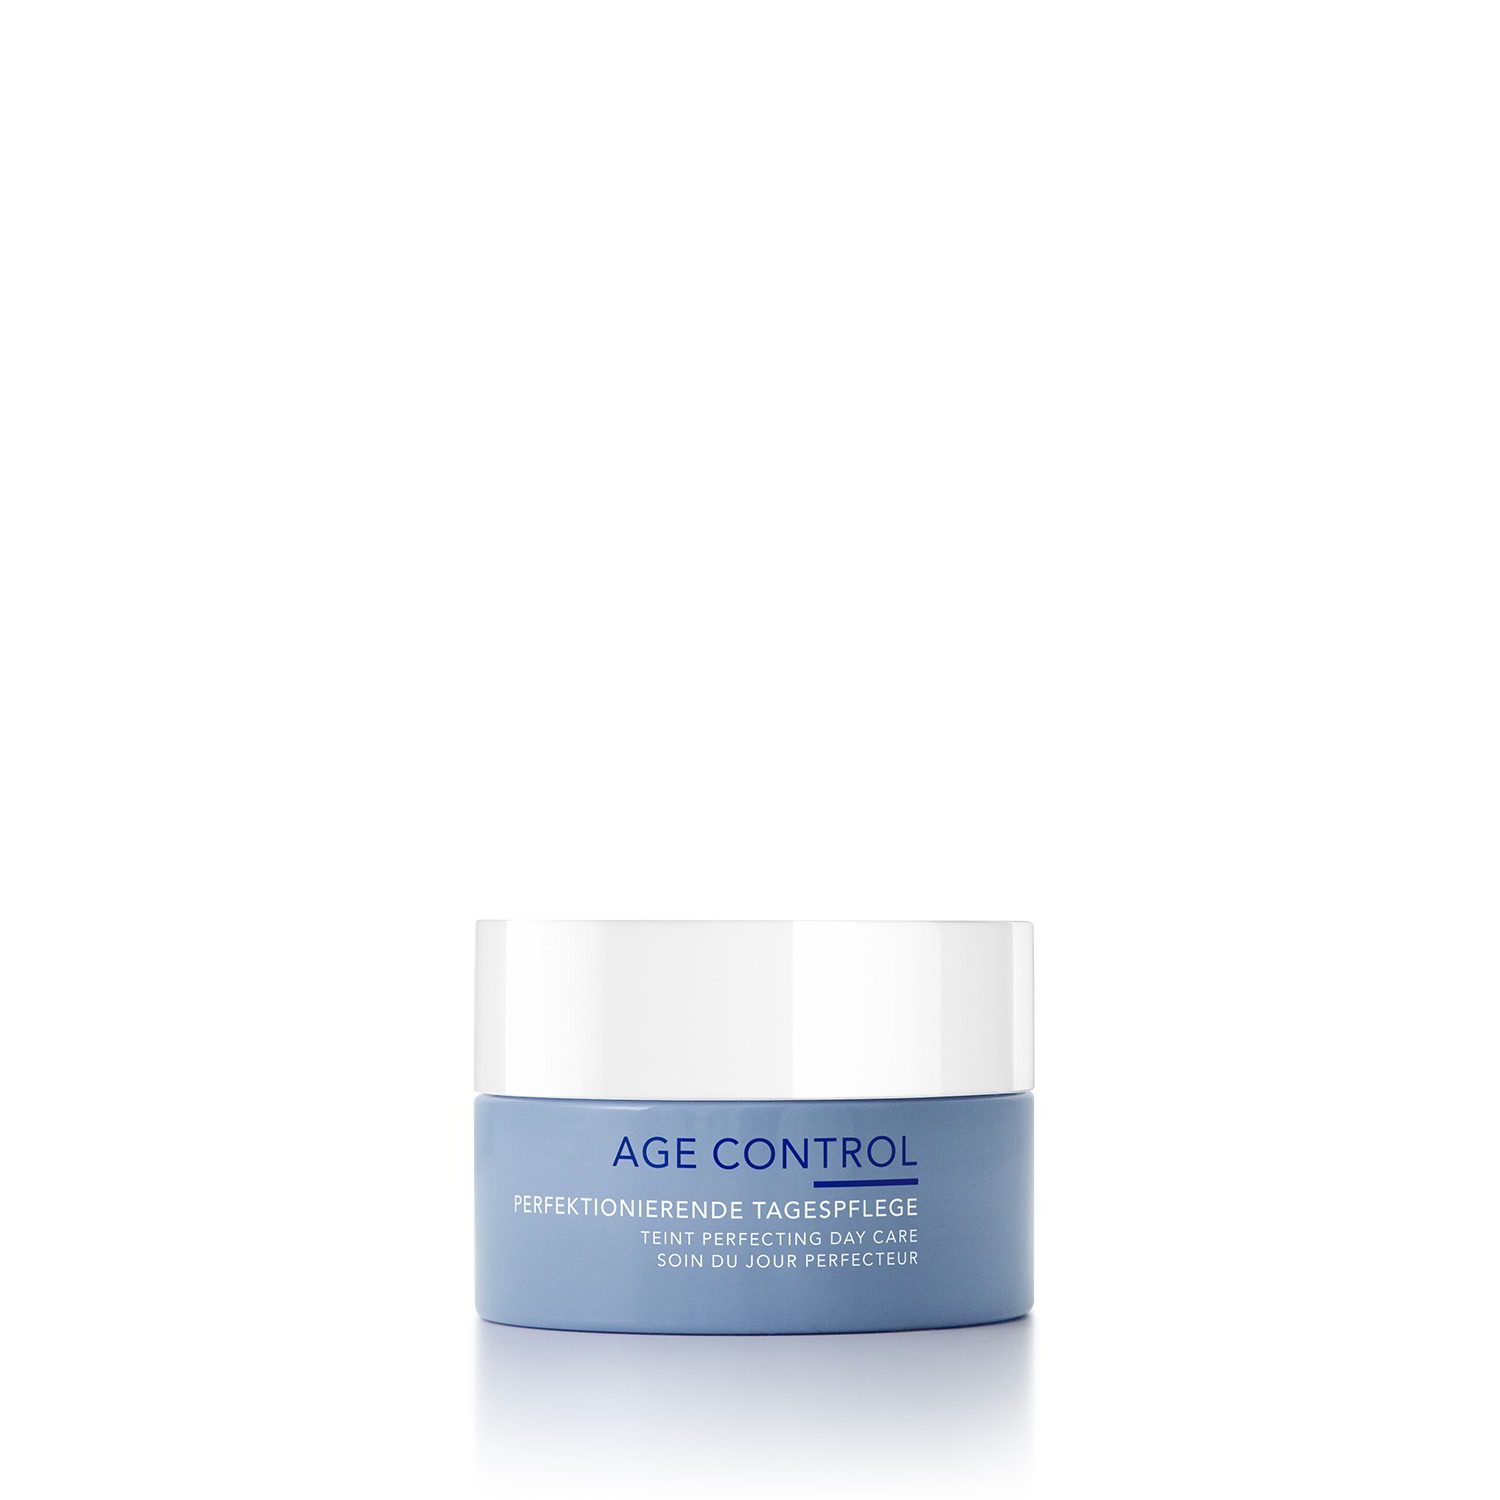 Age Control Teint Perfecting Day Care